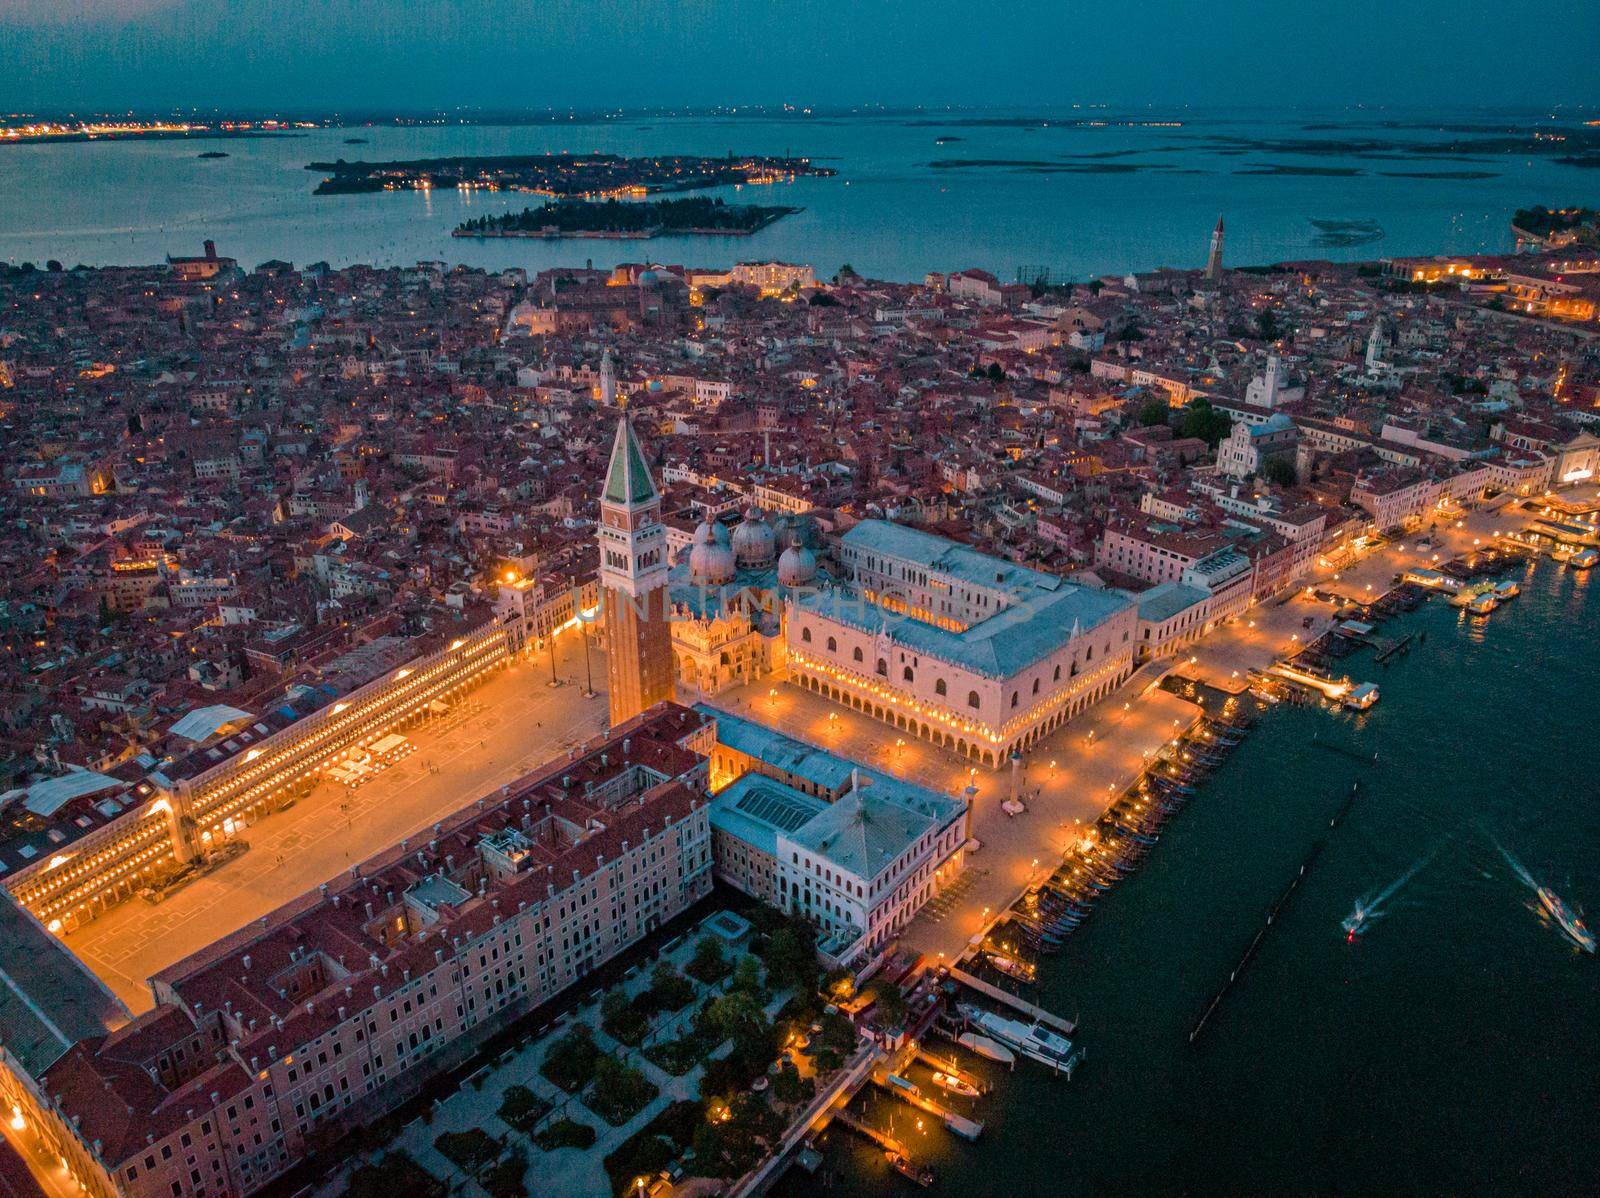 Venice from above with drone, Aerial drone photo of iconic and unique Saint Mark's square or Piazza San Marco featuring Doge's Palace, Basilica and Campanile, Venice, Italy by fokkebok